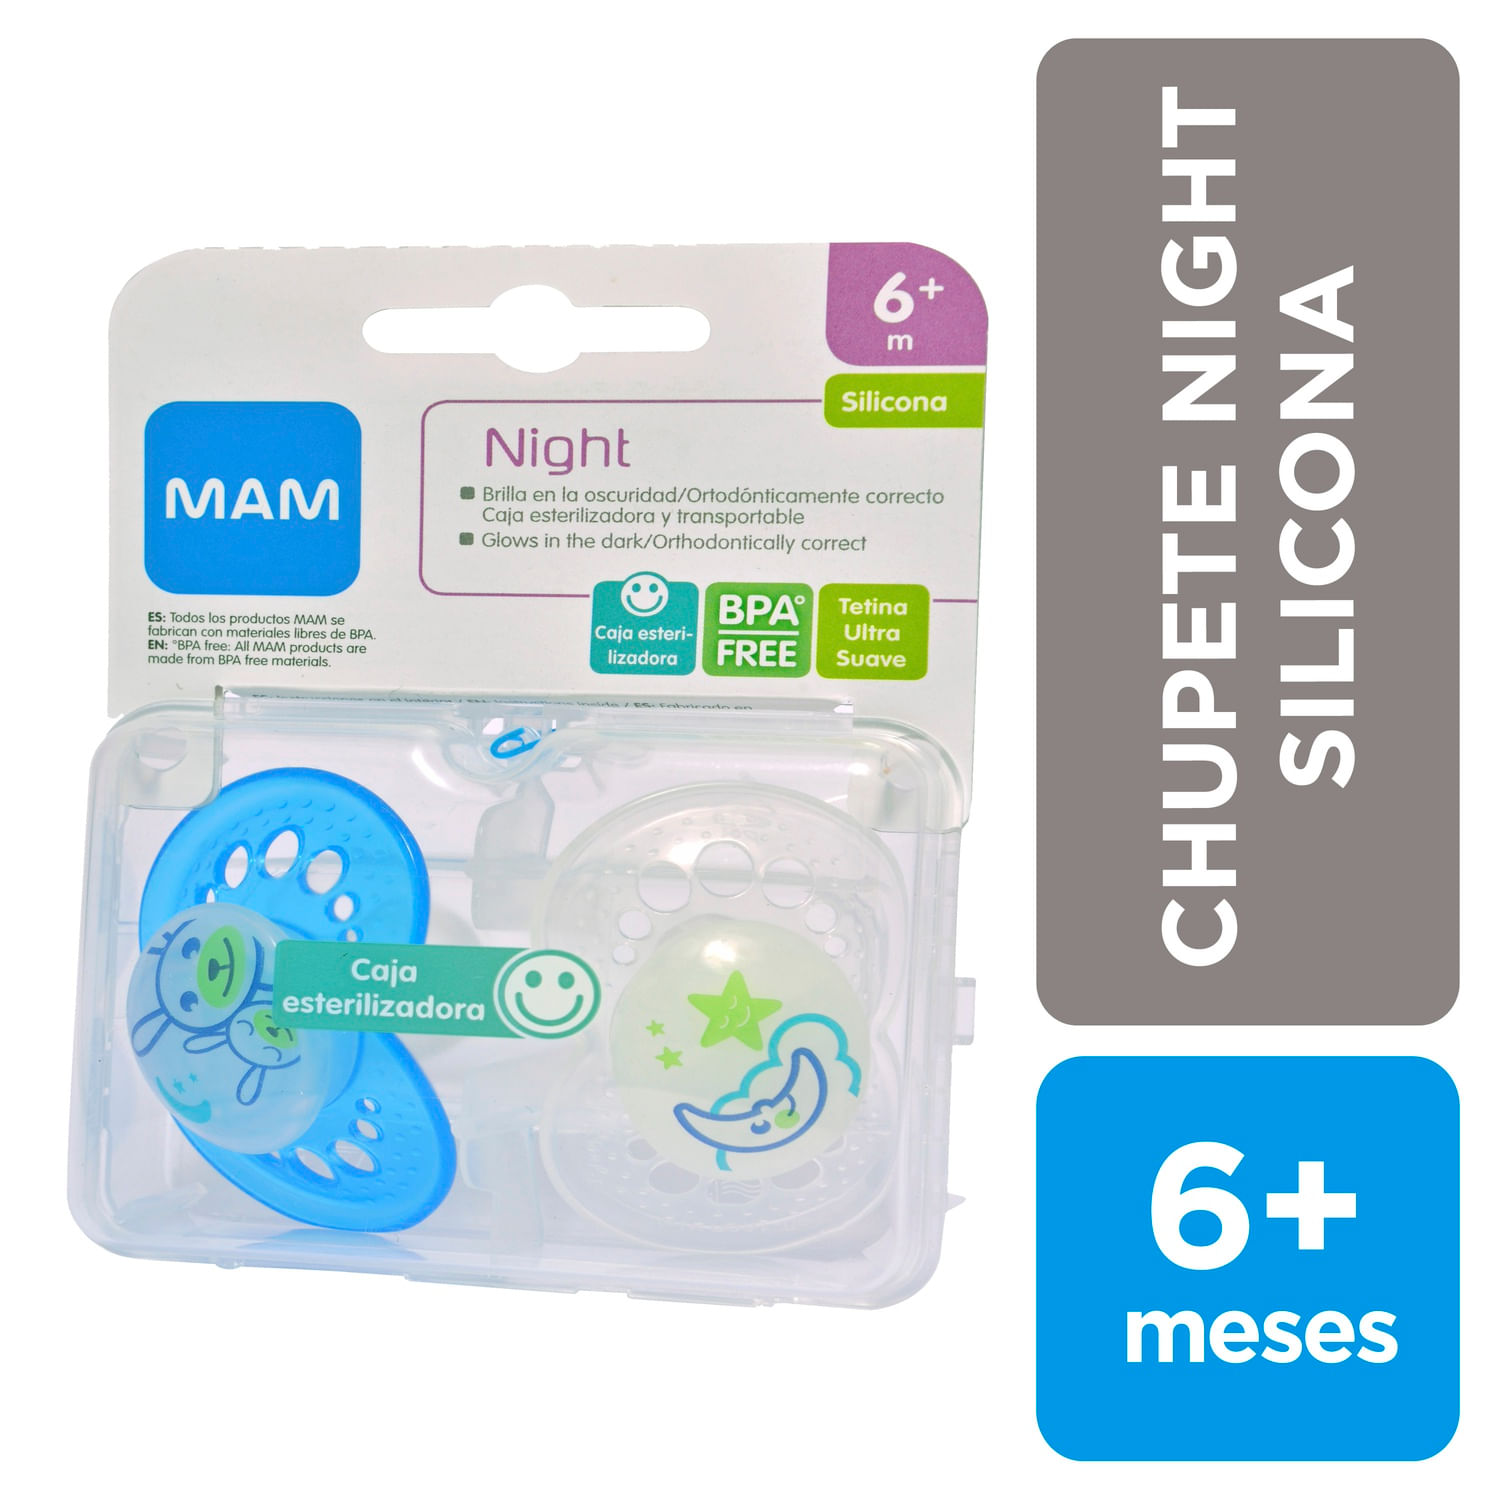 Chupete Mam Start Silicona, Productos